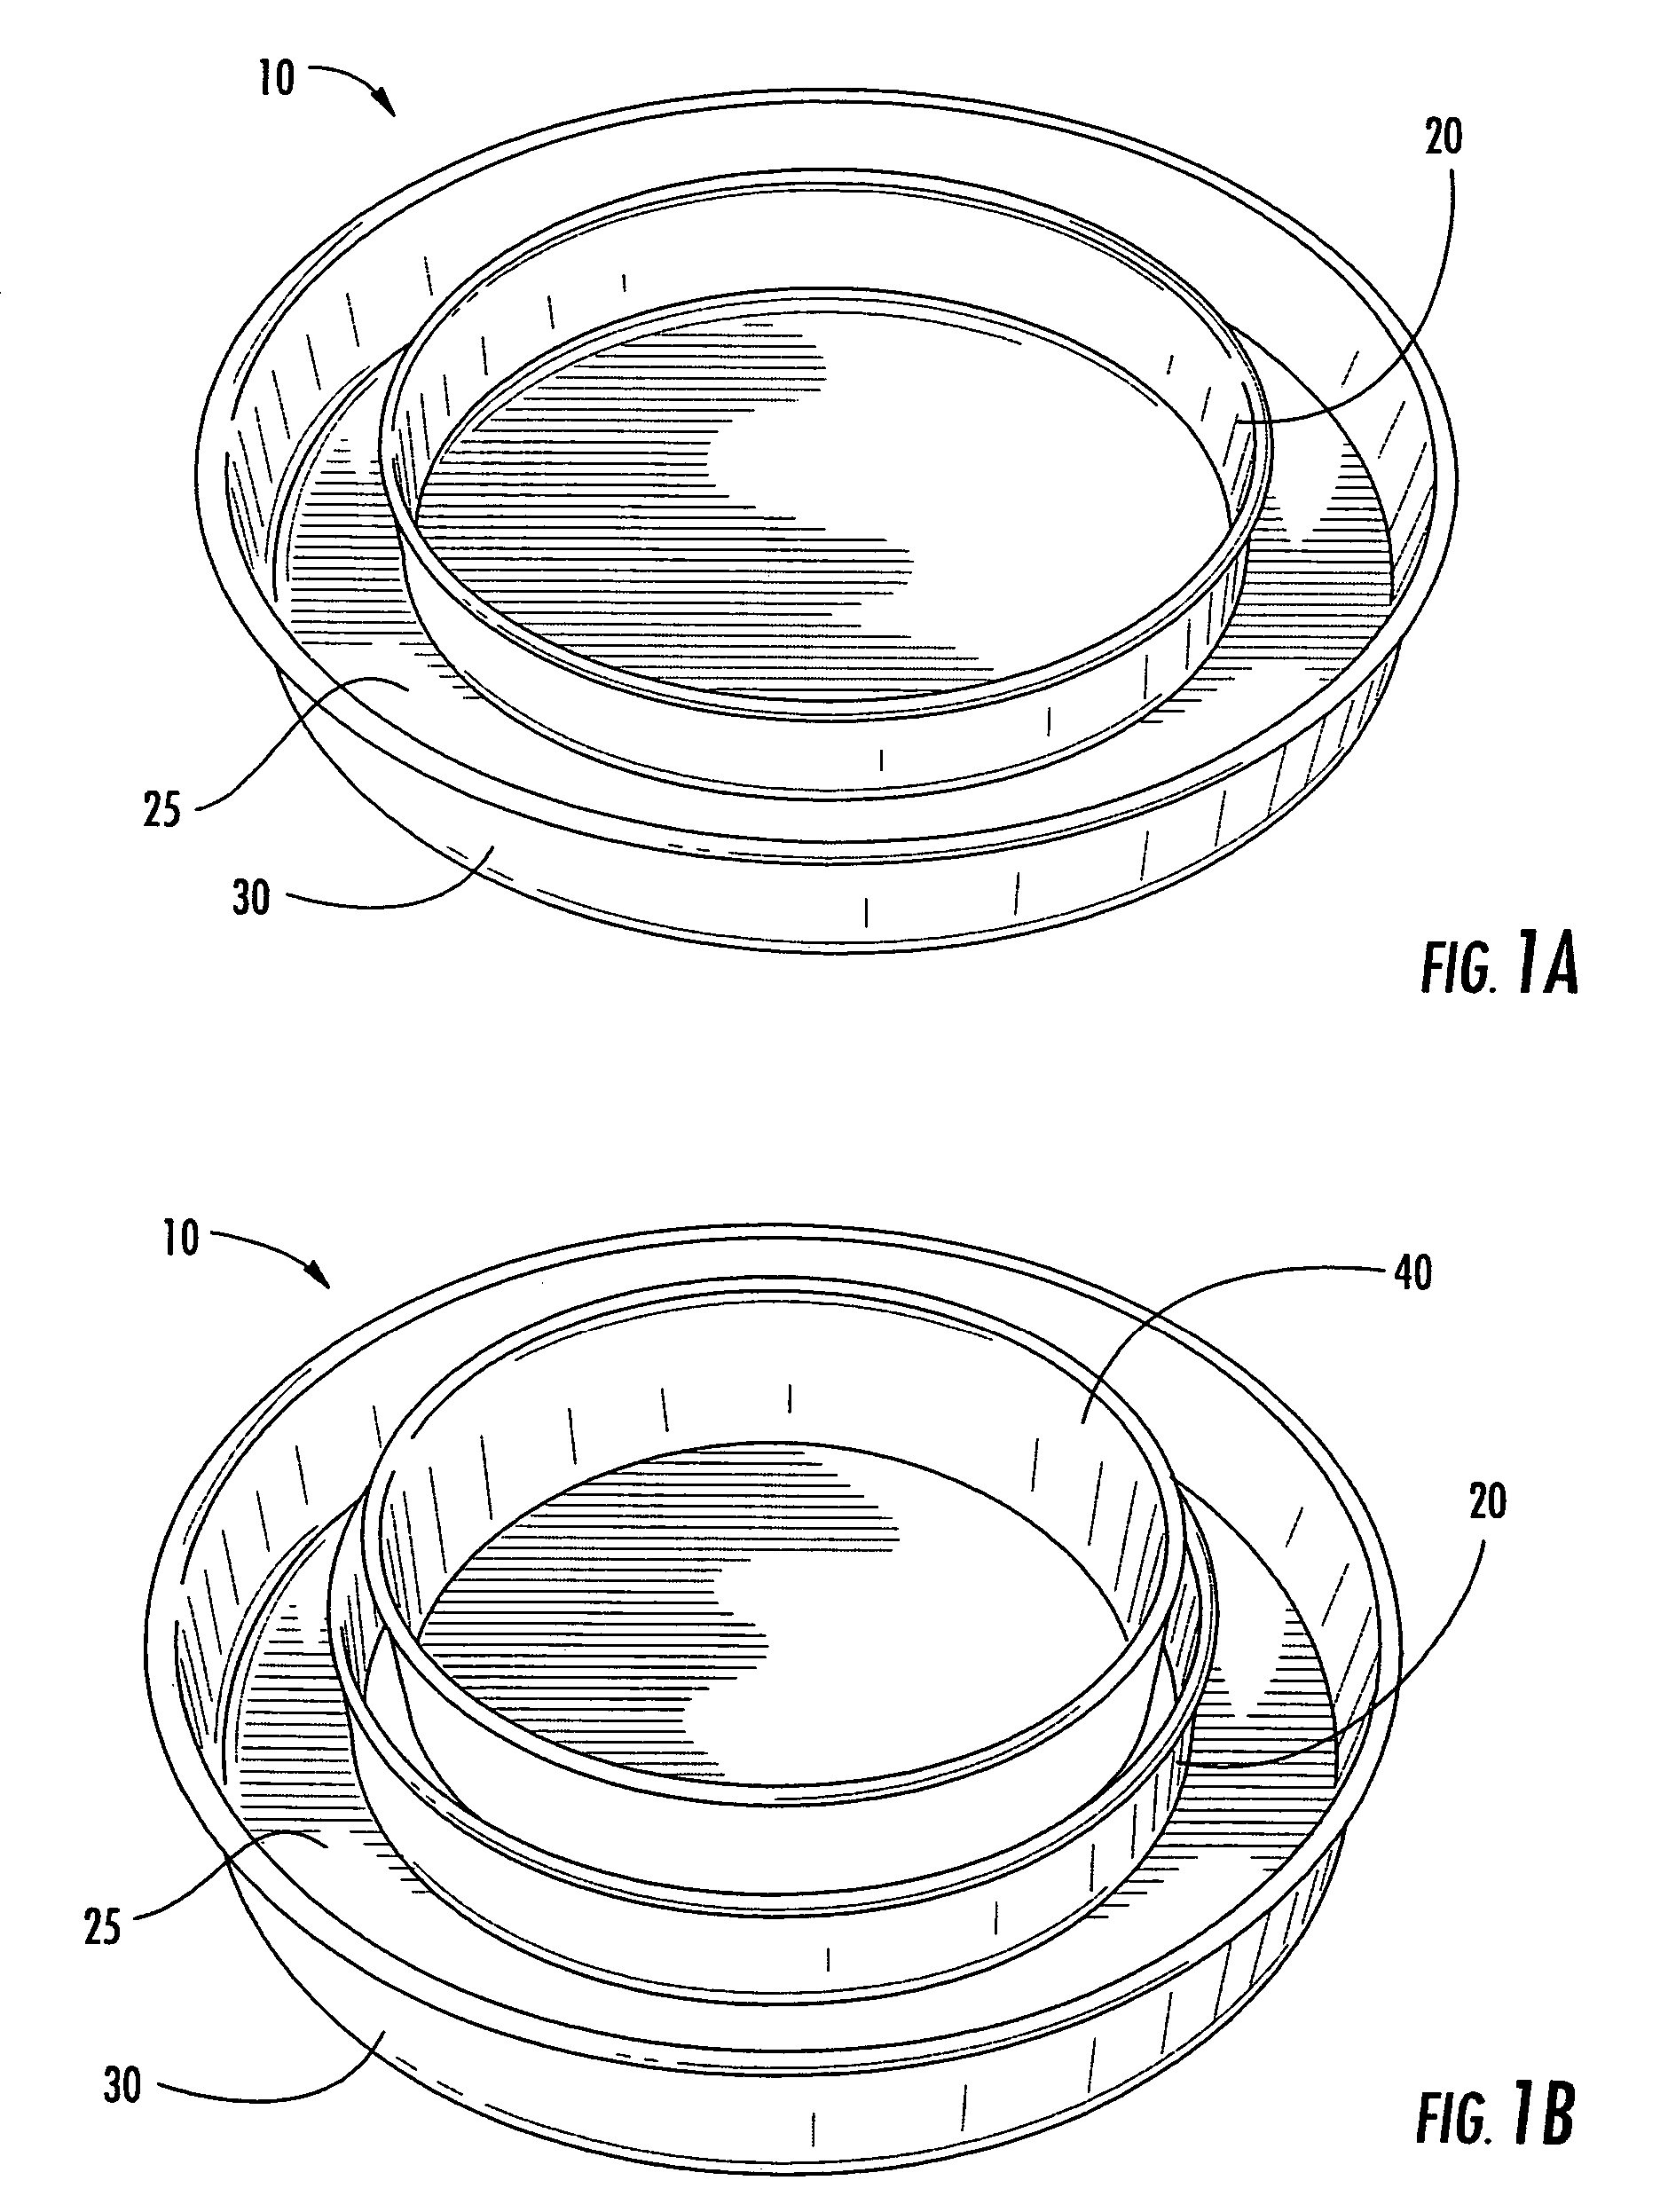 Baking apparatuses and methods of use